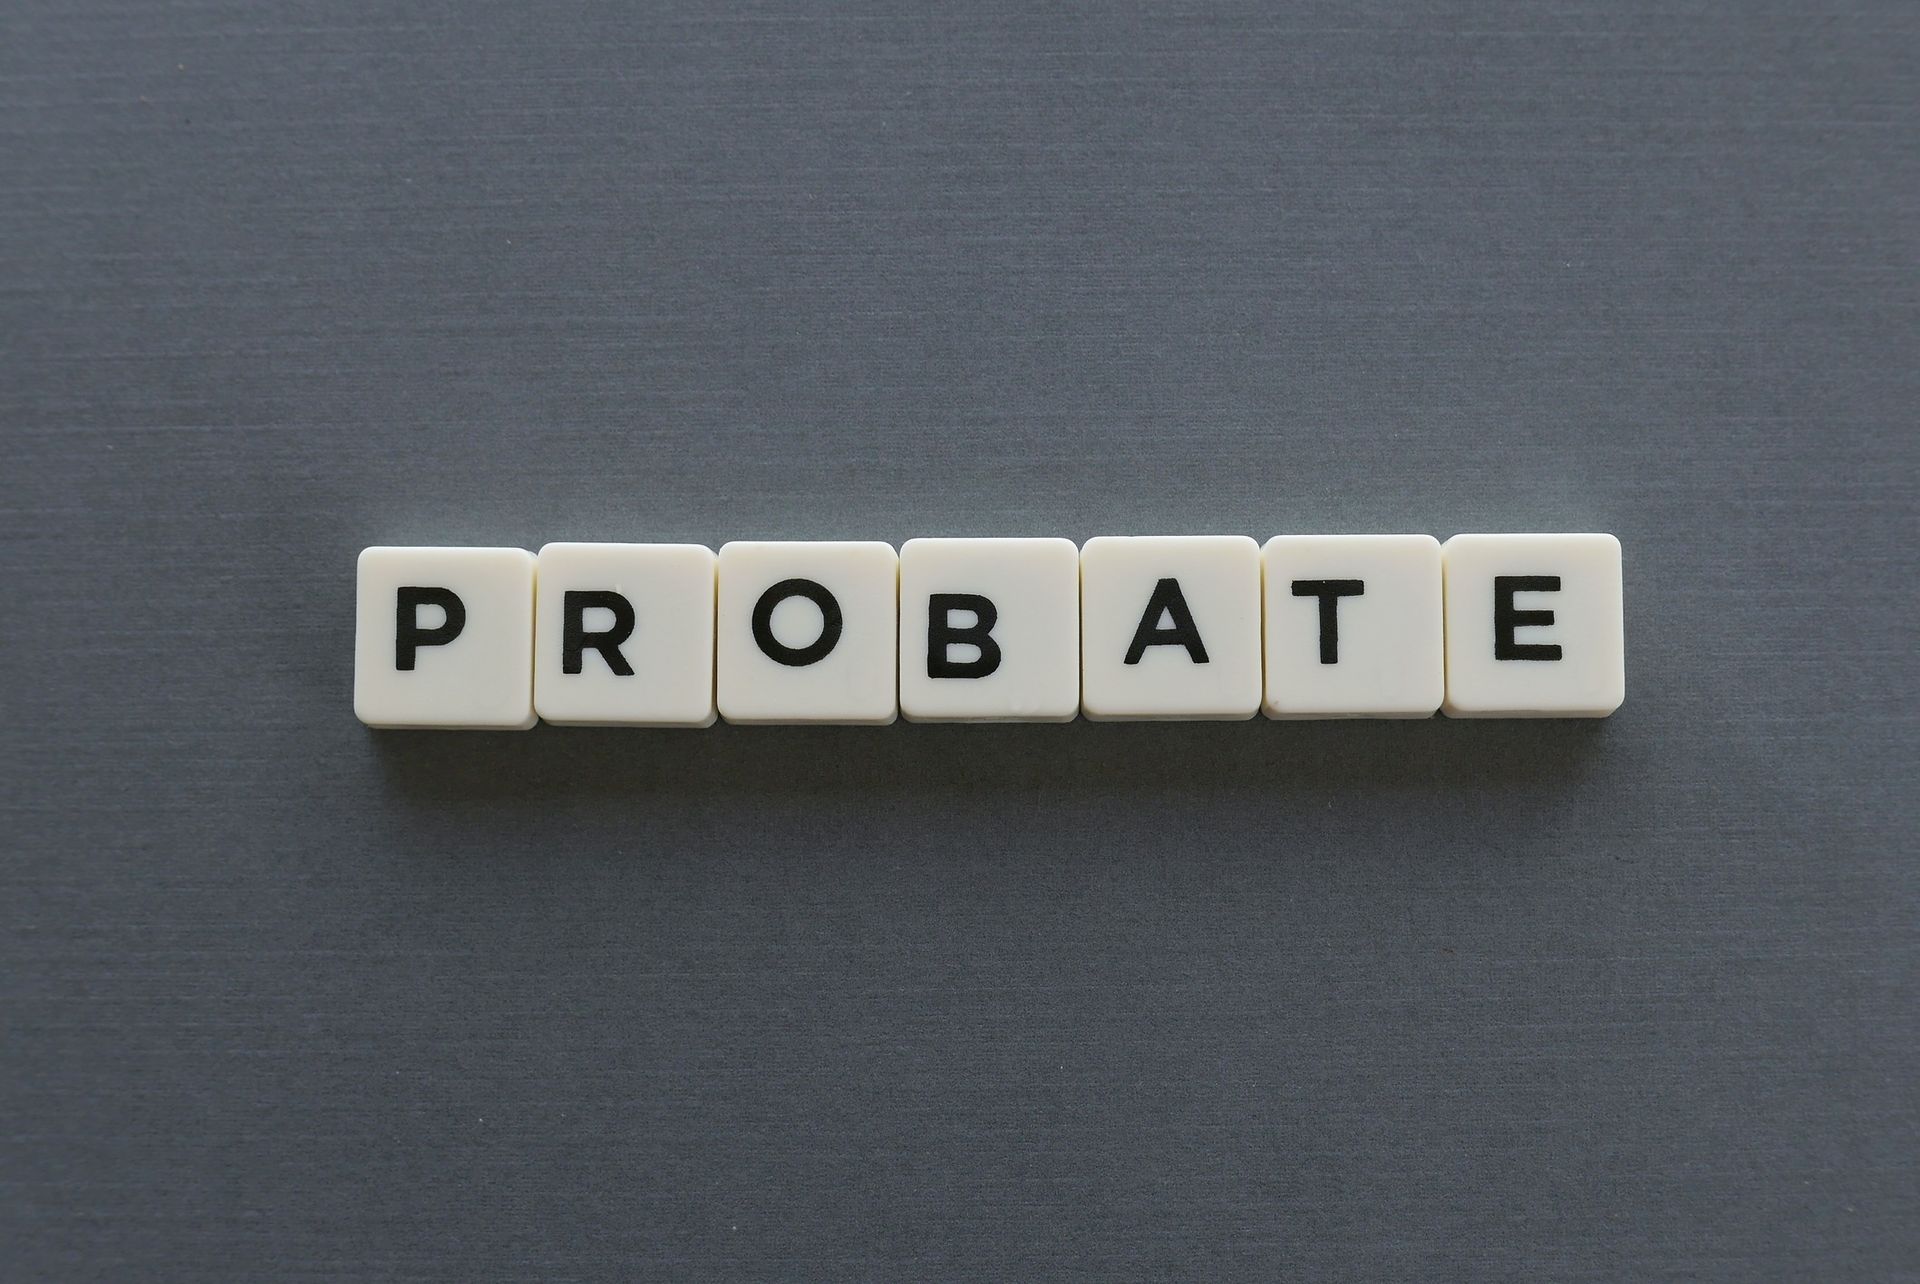 the word probate is written in scrabble tiles on a grey surface